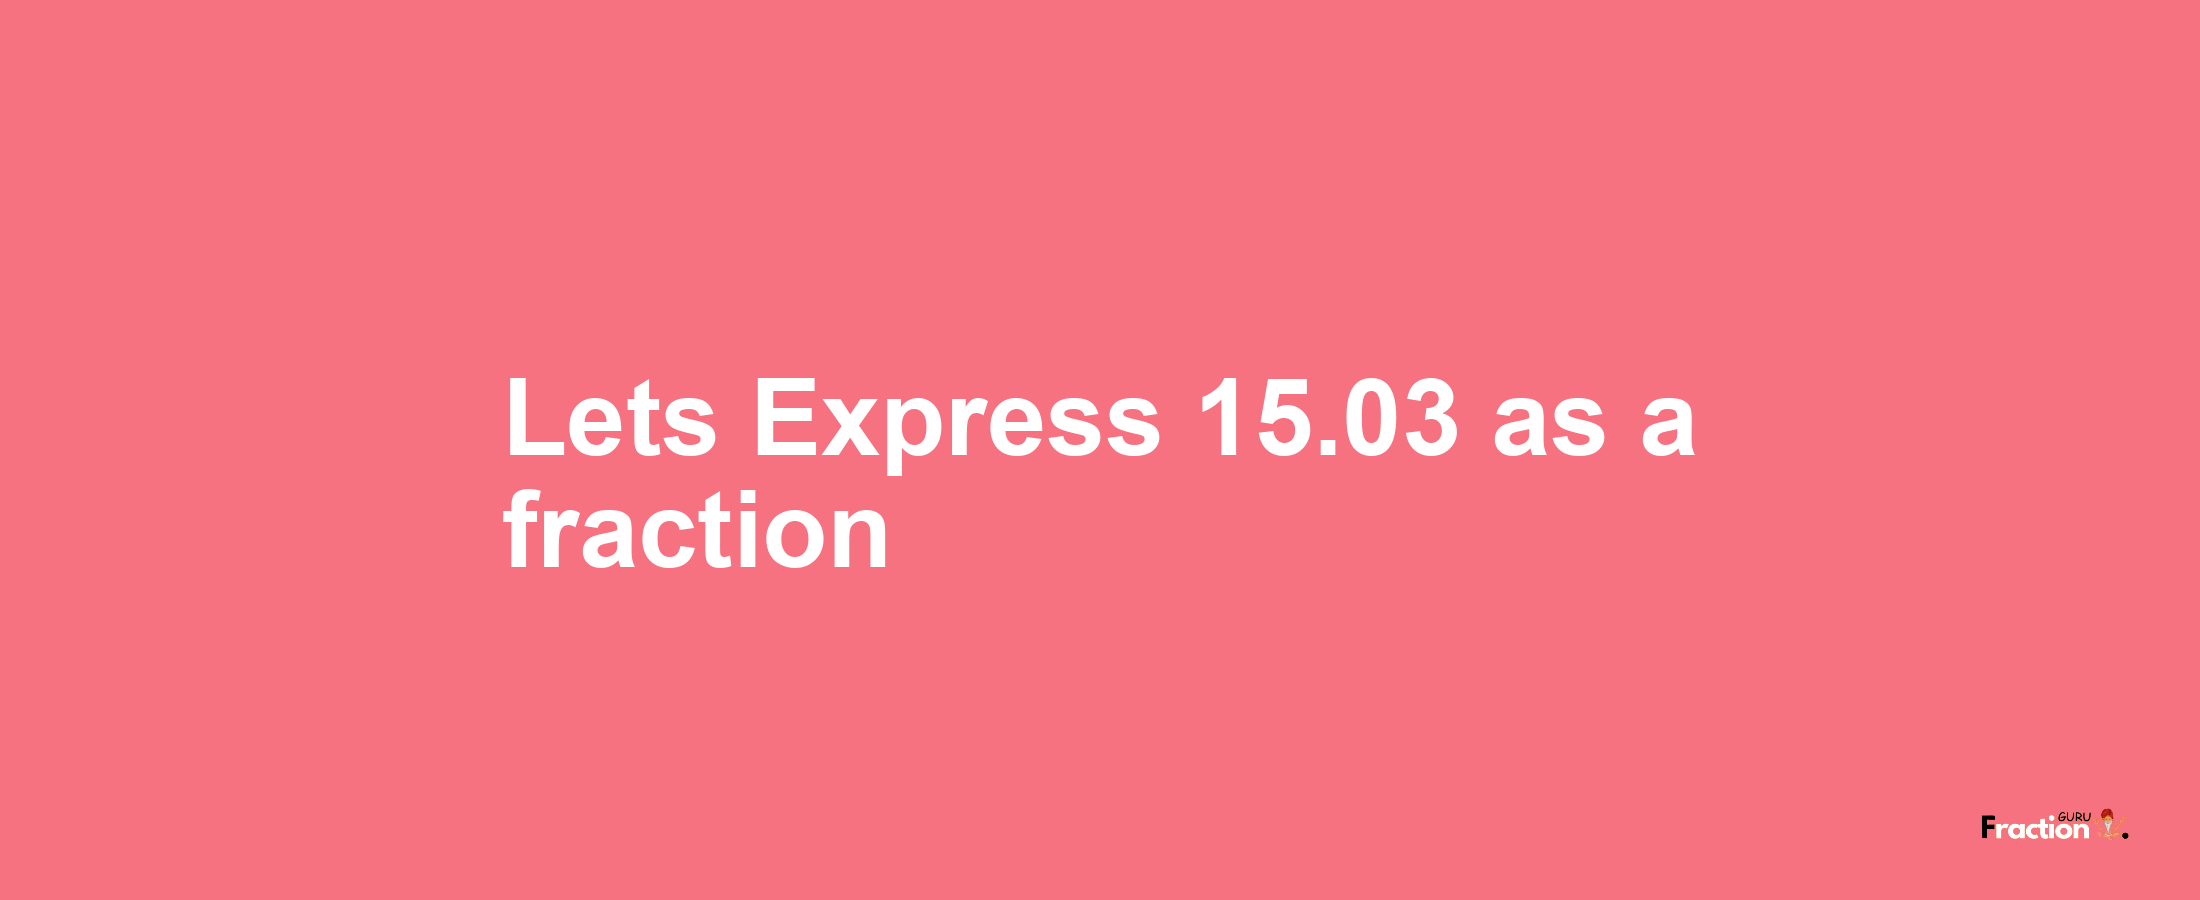 Lets Express 15.03 as afraction